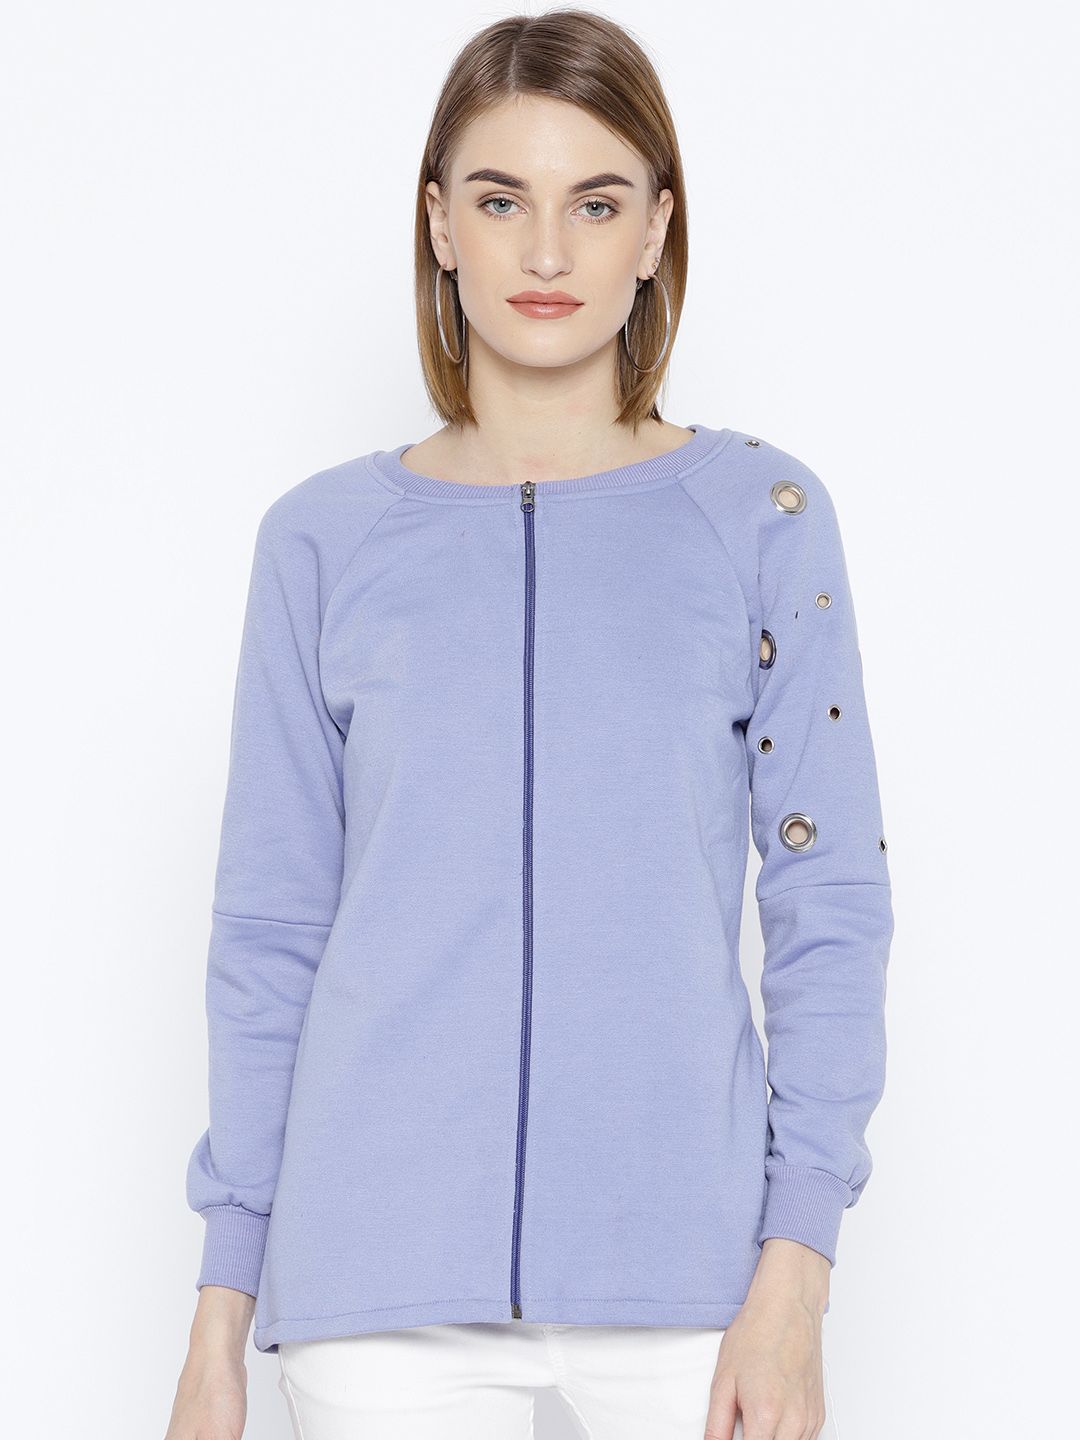 Belle Fille Women Lavender Solid Sweatshirt with Cut-Out Detail Price in India